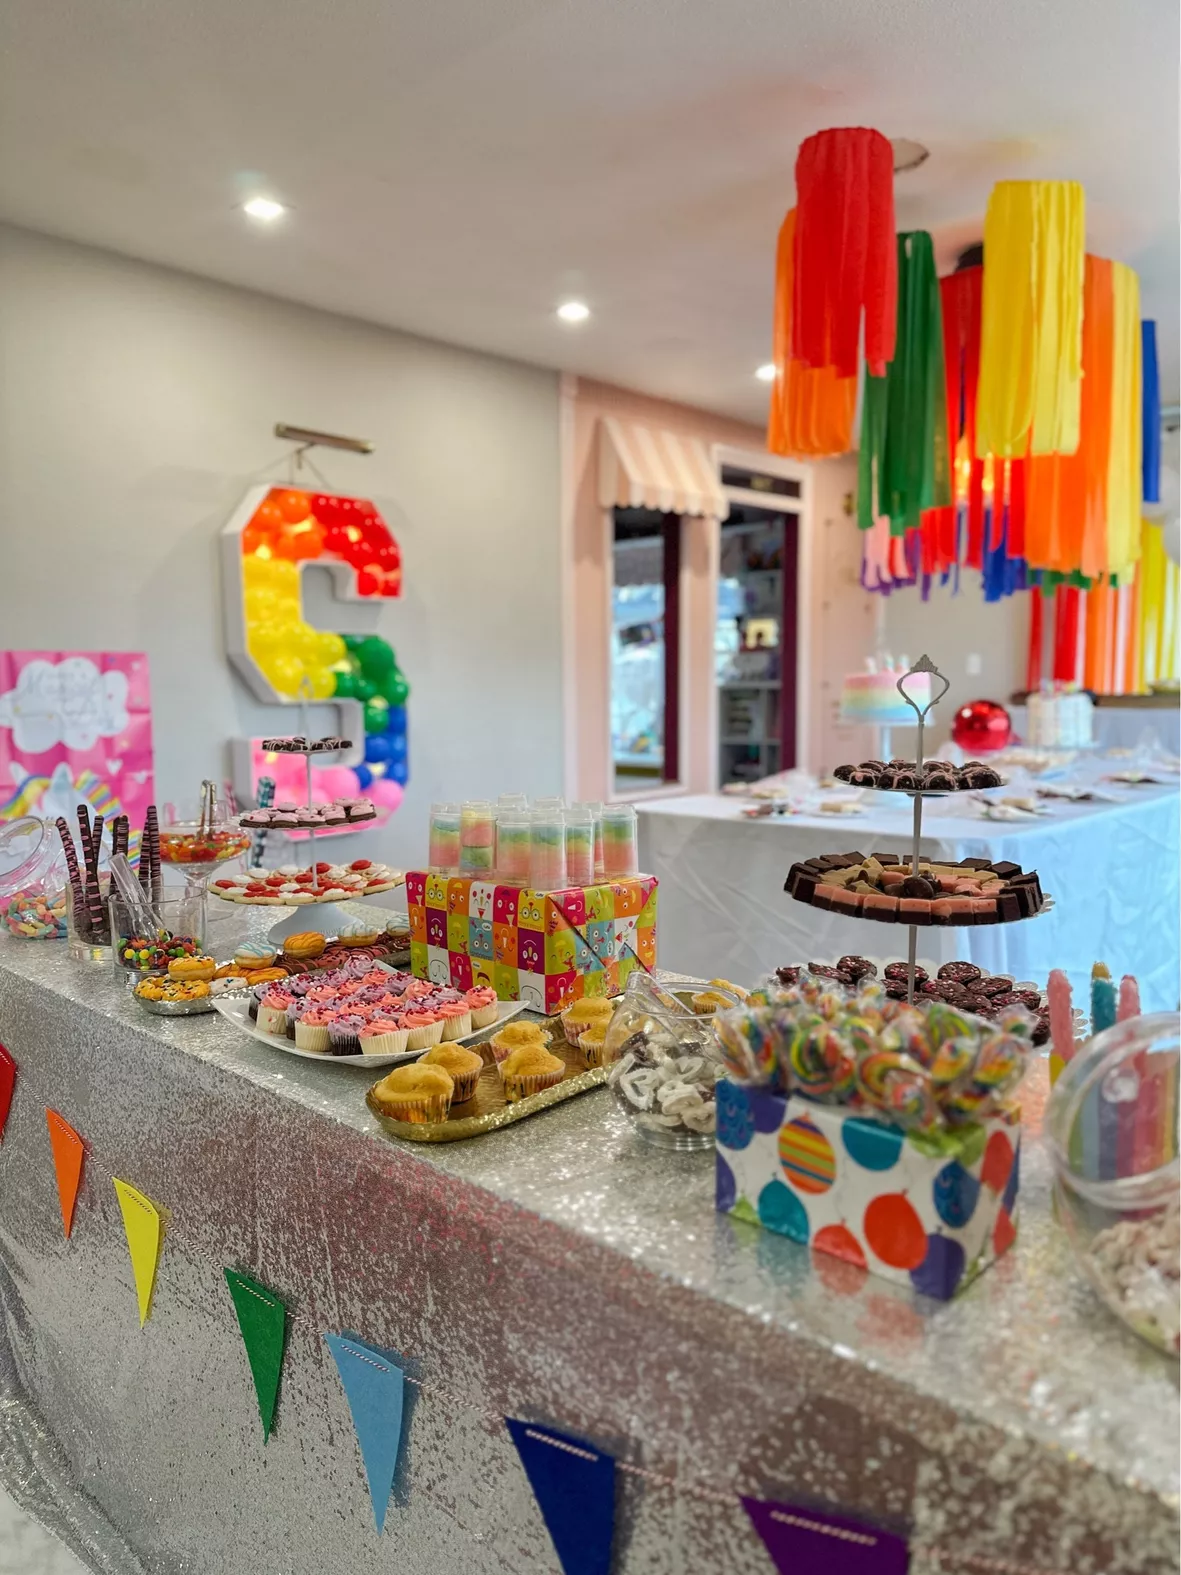 Fun Rainbow Party Ideas For Kids - Sweet Party Place